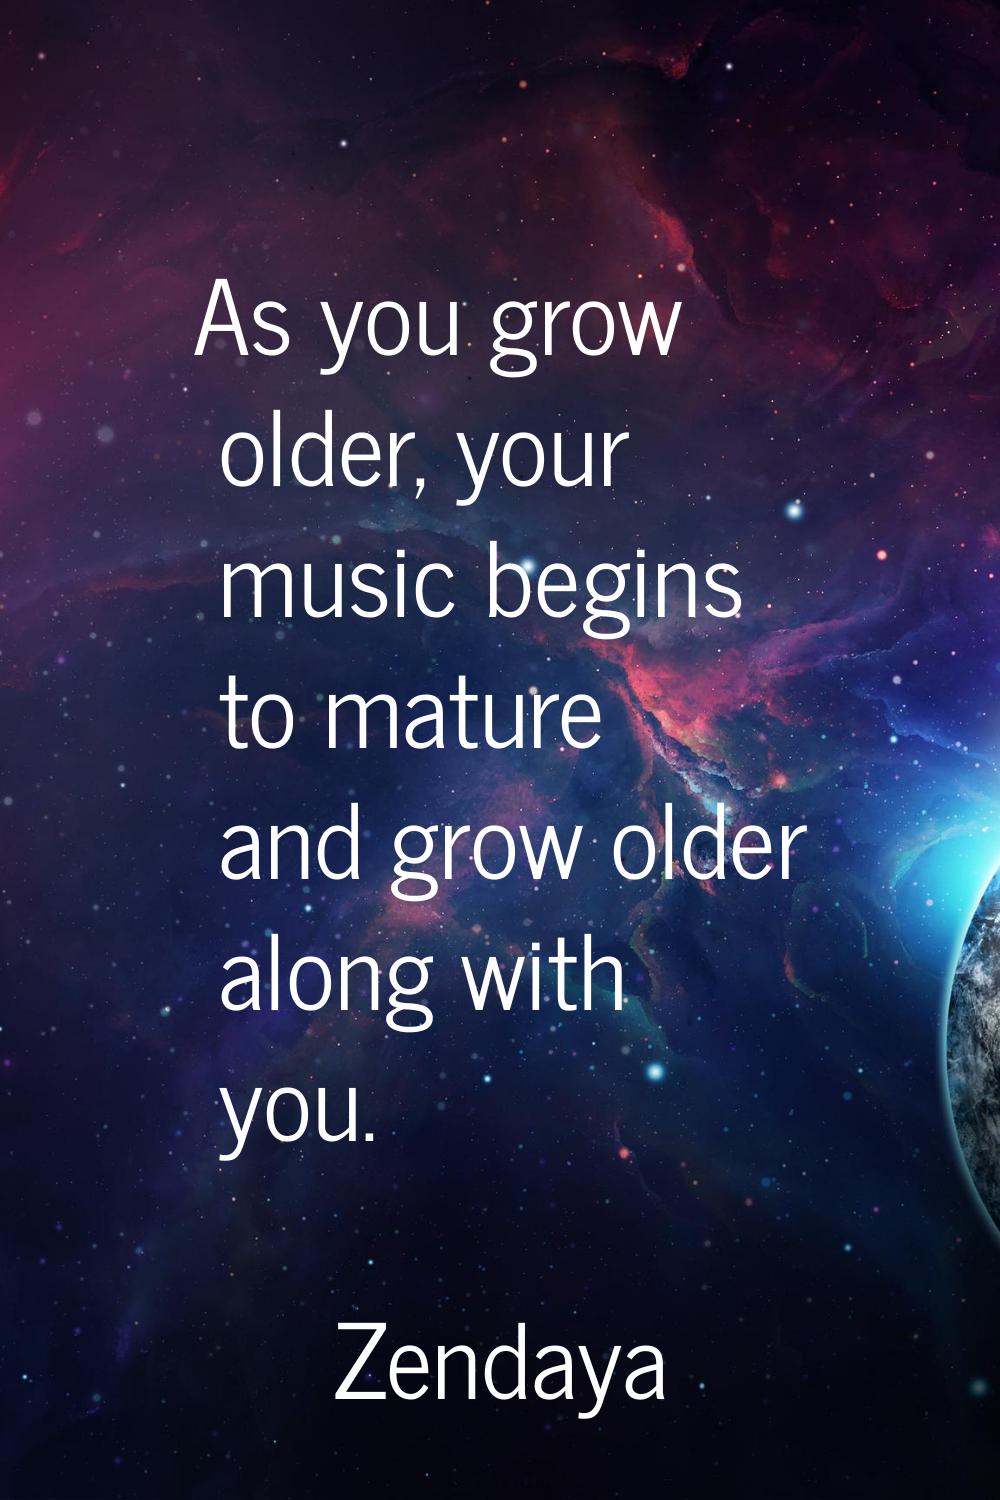 As you grow older, your music begins to mature and grow older along with you.